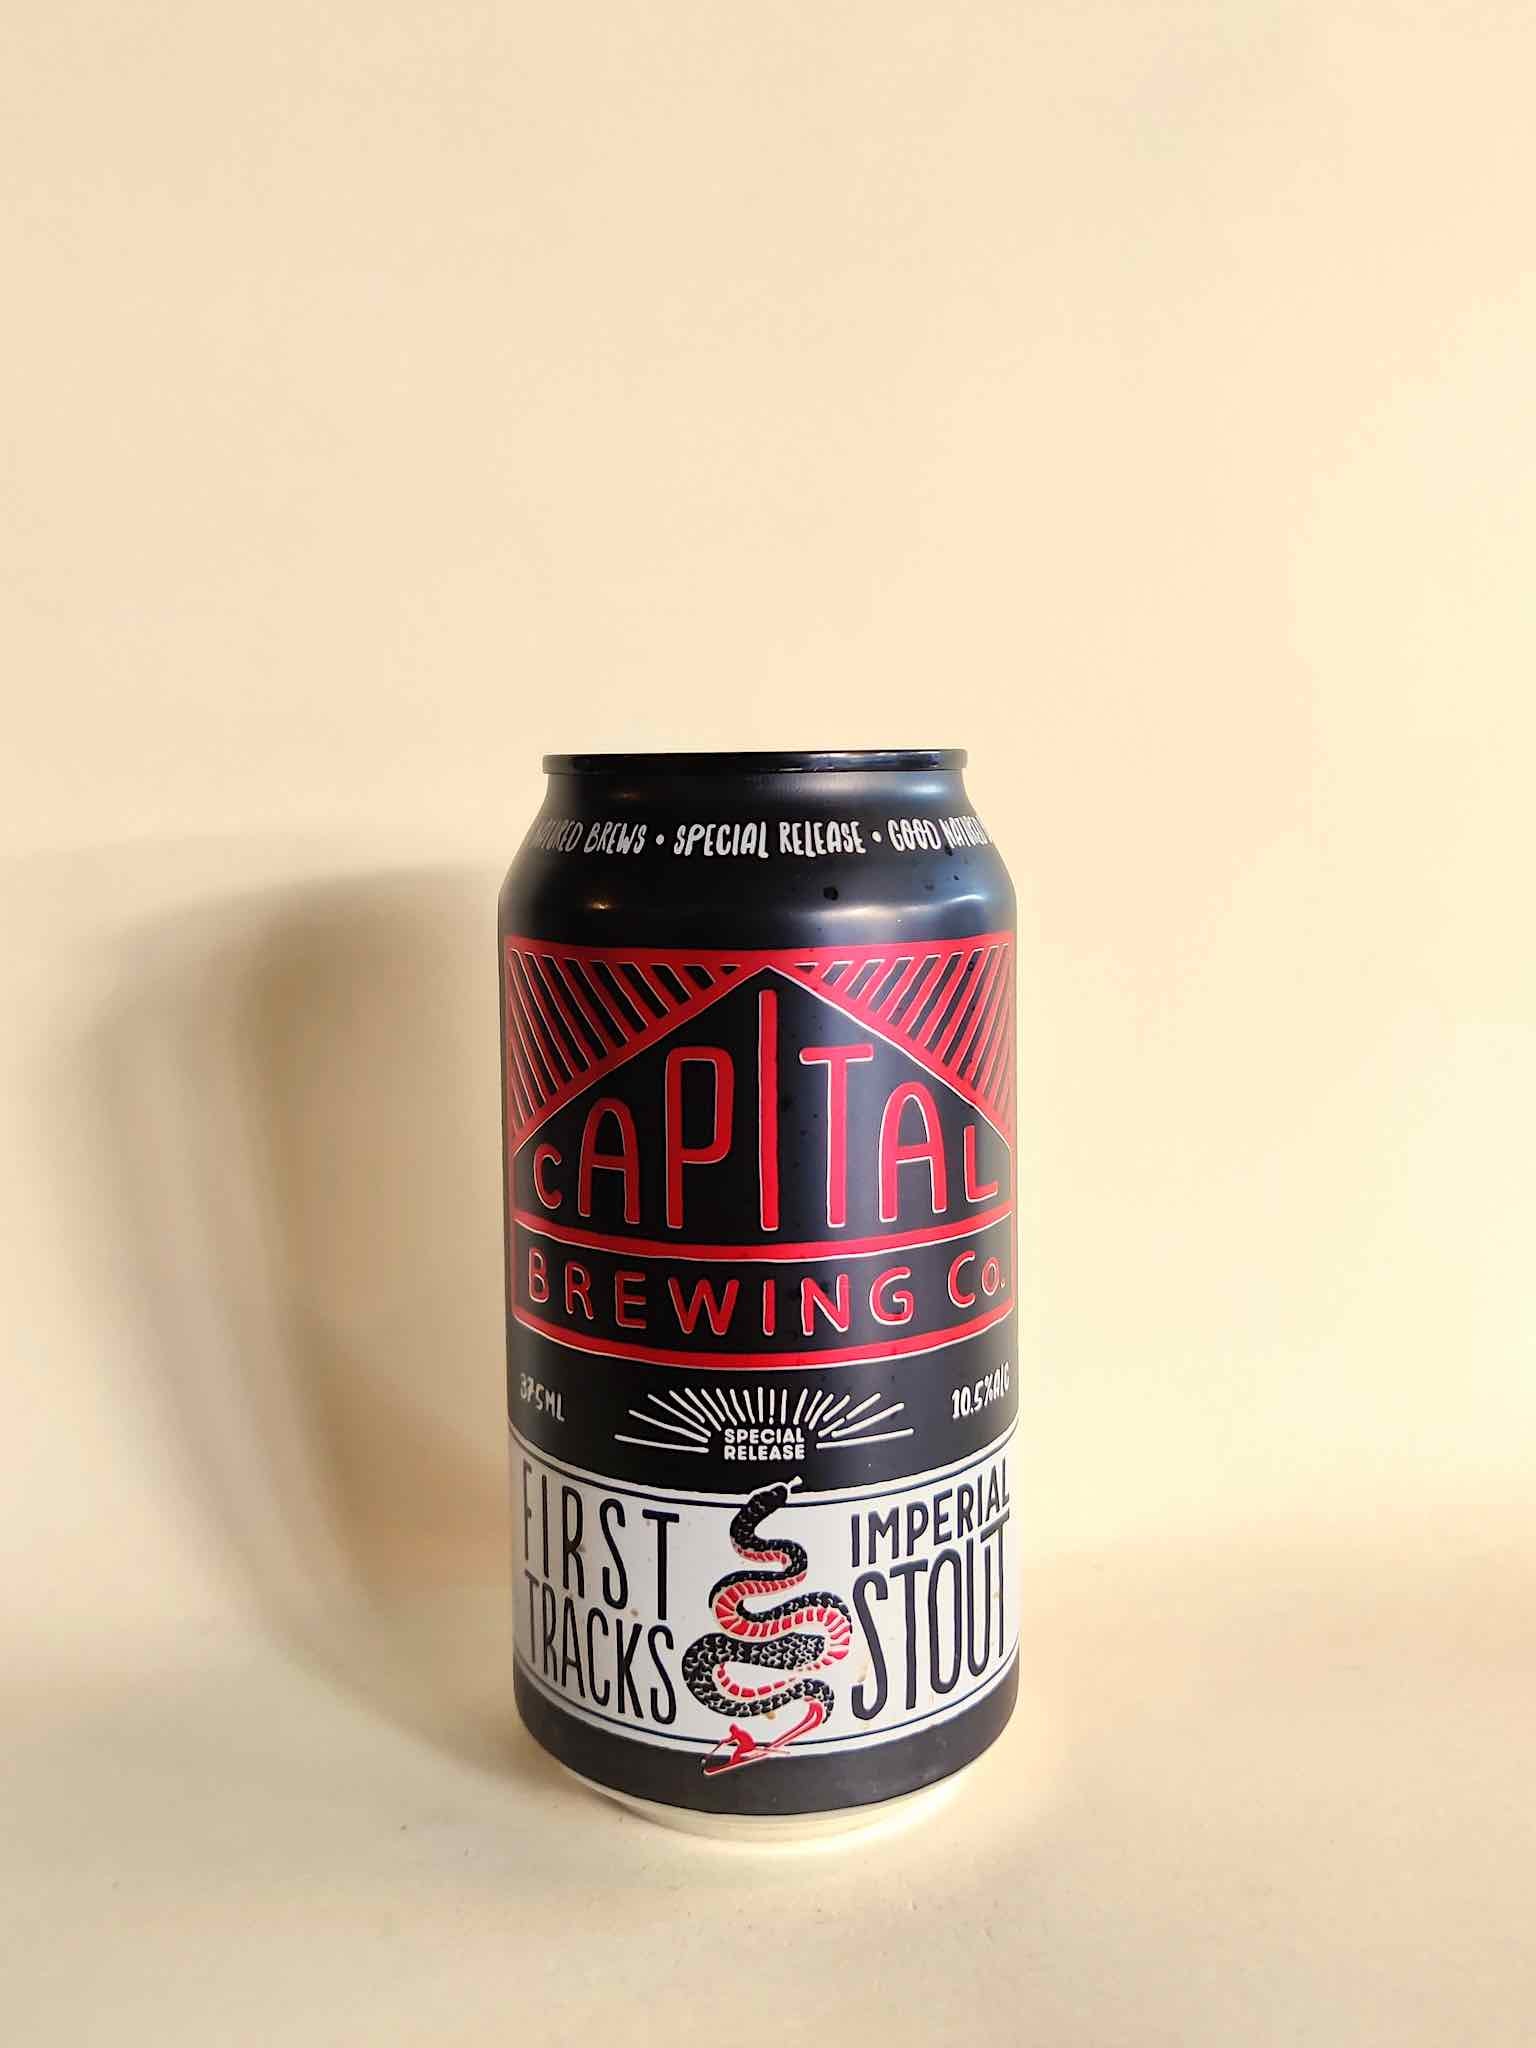 A can of Capital Brewing First Tracks Imperial Stout from Canberra. 